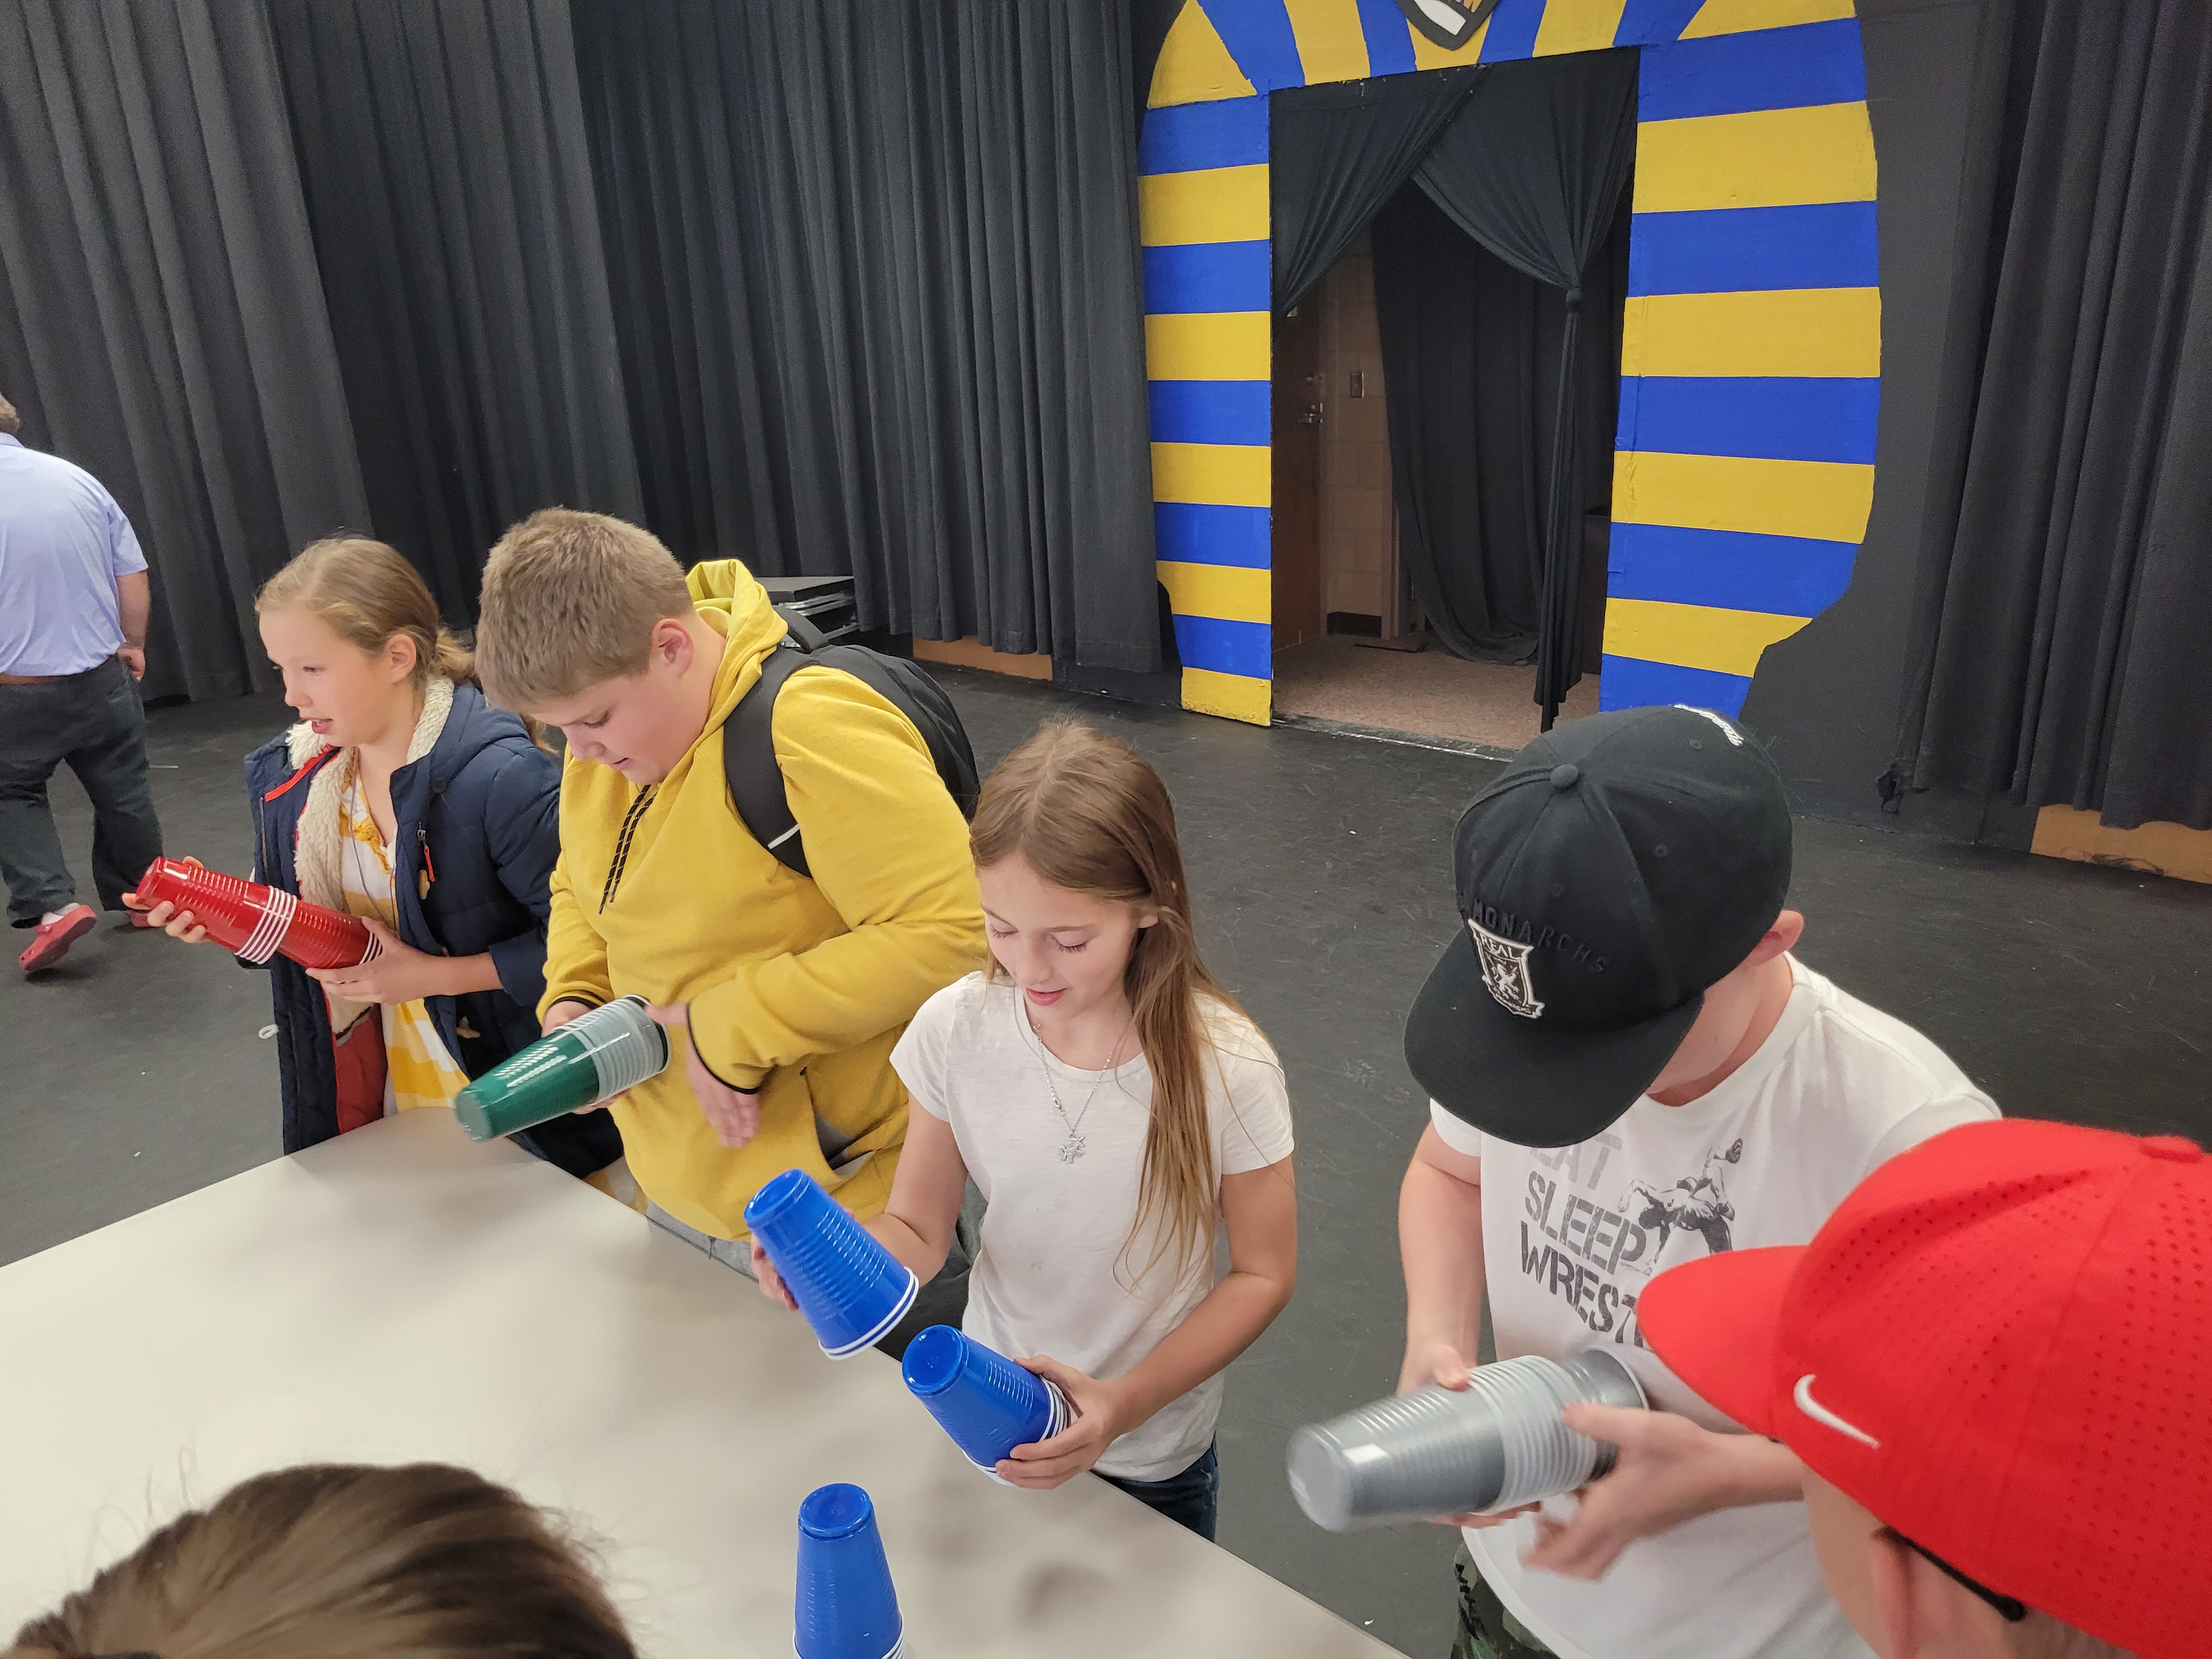 Students completing in the cup stacking game